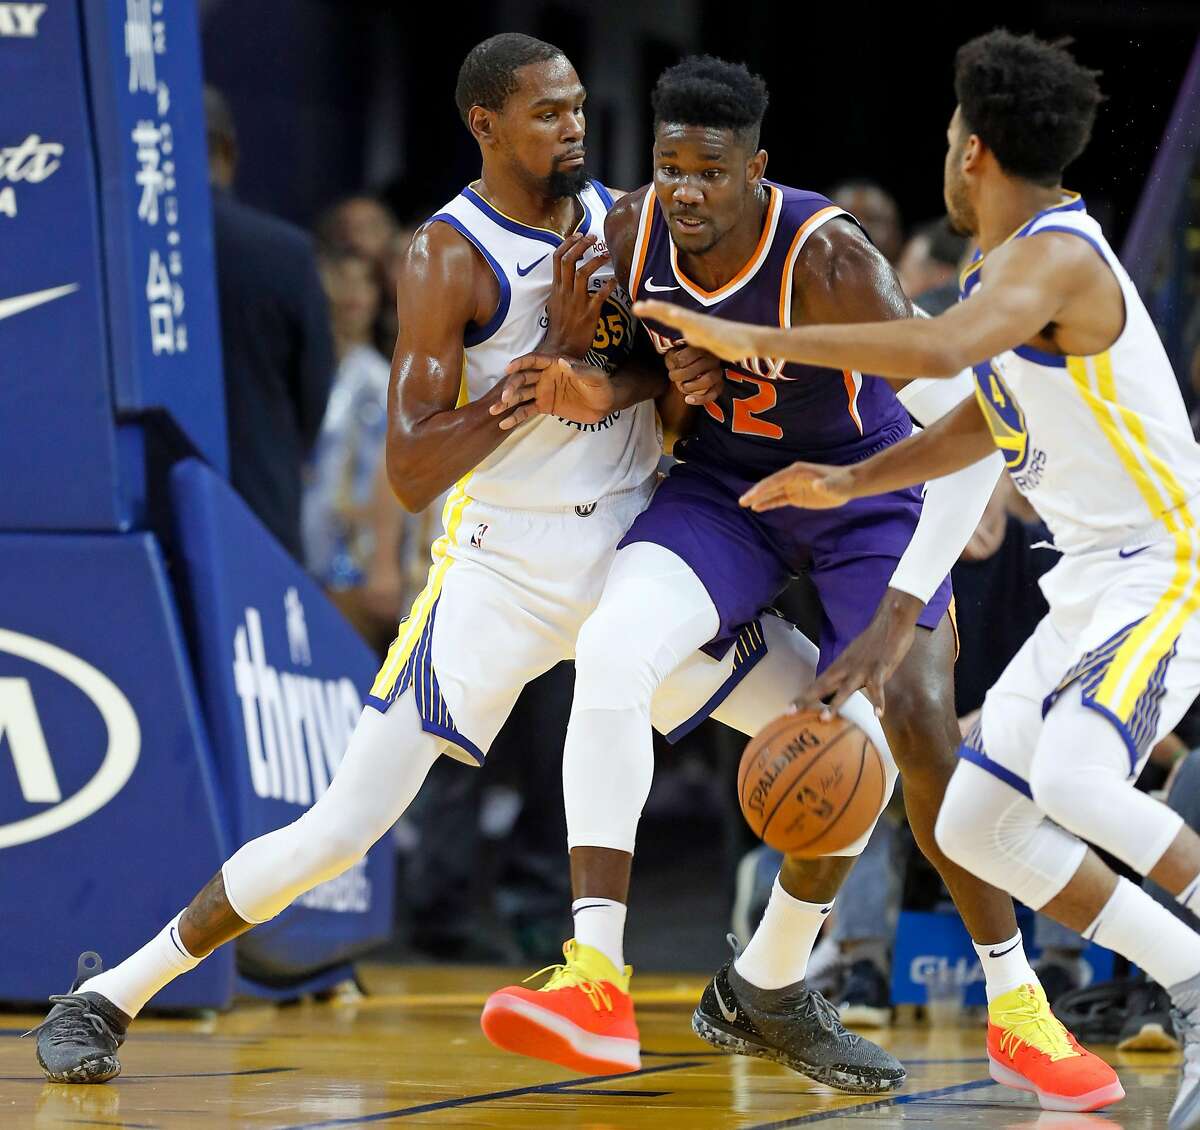 Golden State Warriors' Kevin Durant guards Phoenix Suns' Deandre Ayton in 2nd quarter during NBA preseason game at Oracle Arena in Oakland, Calif. on Monday, October 8, 2018.